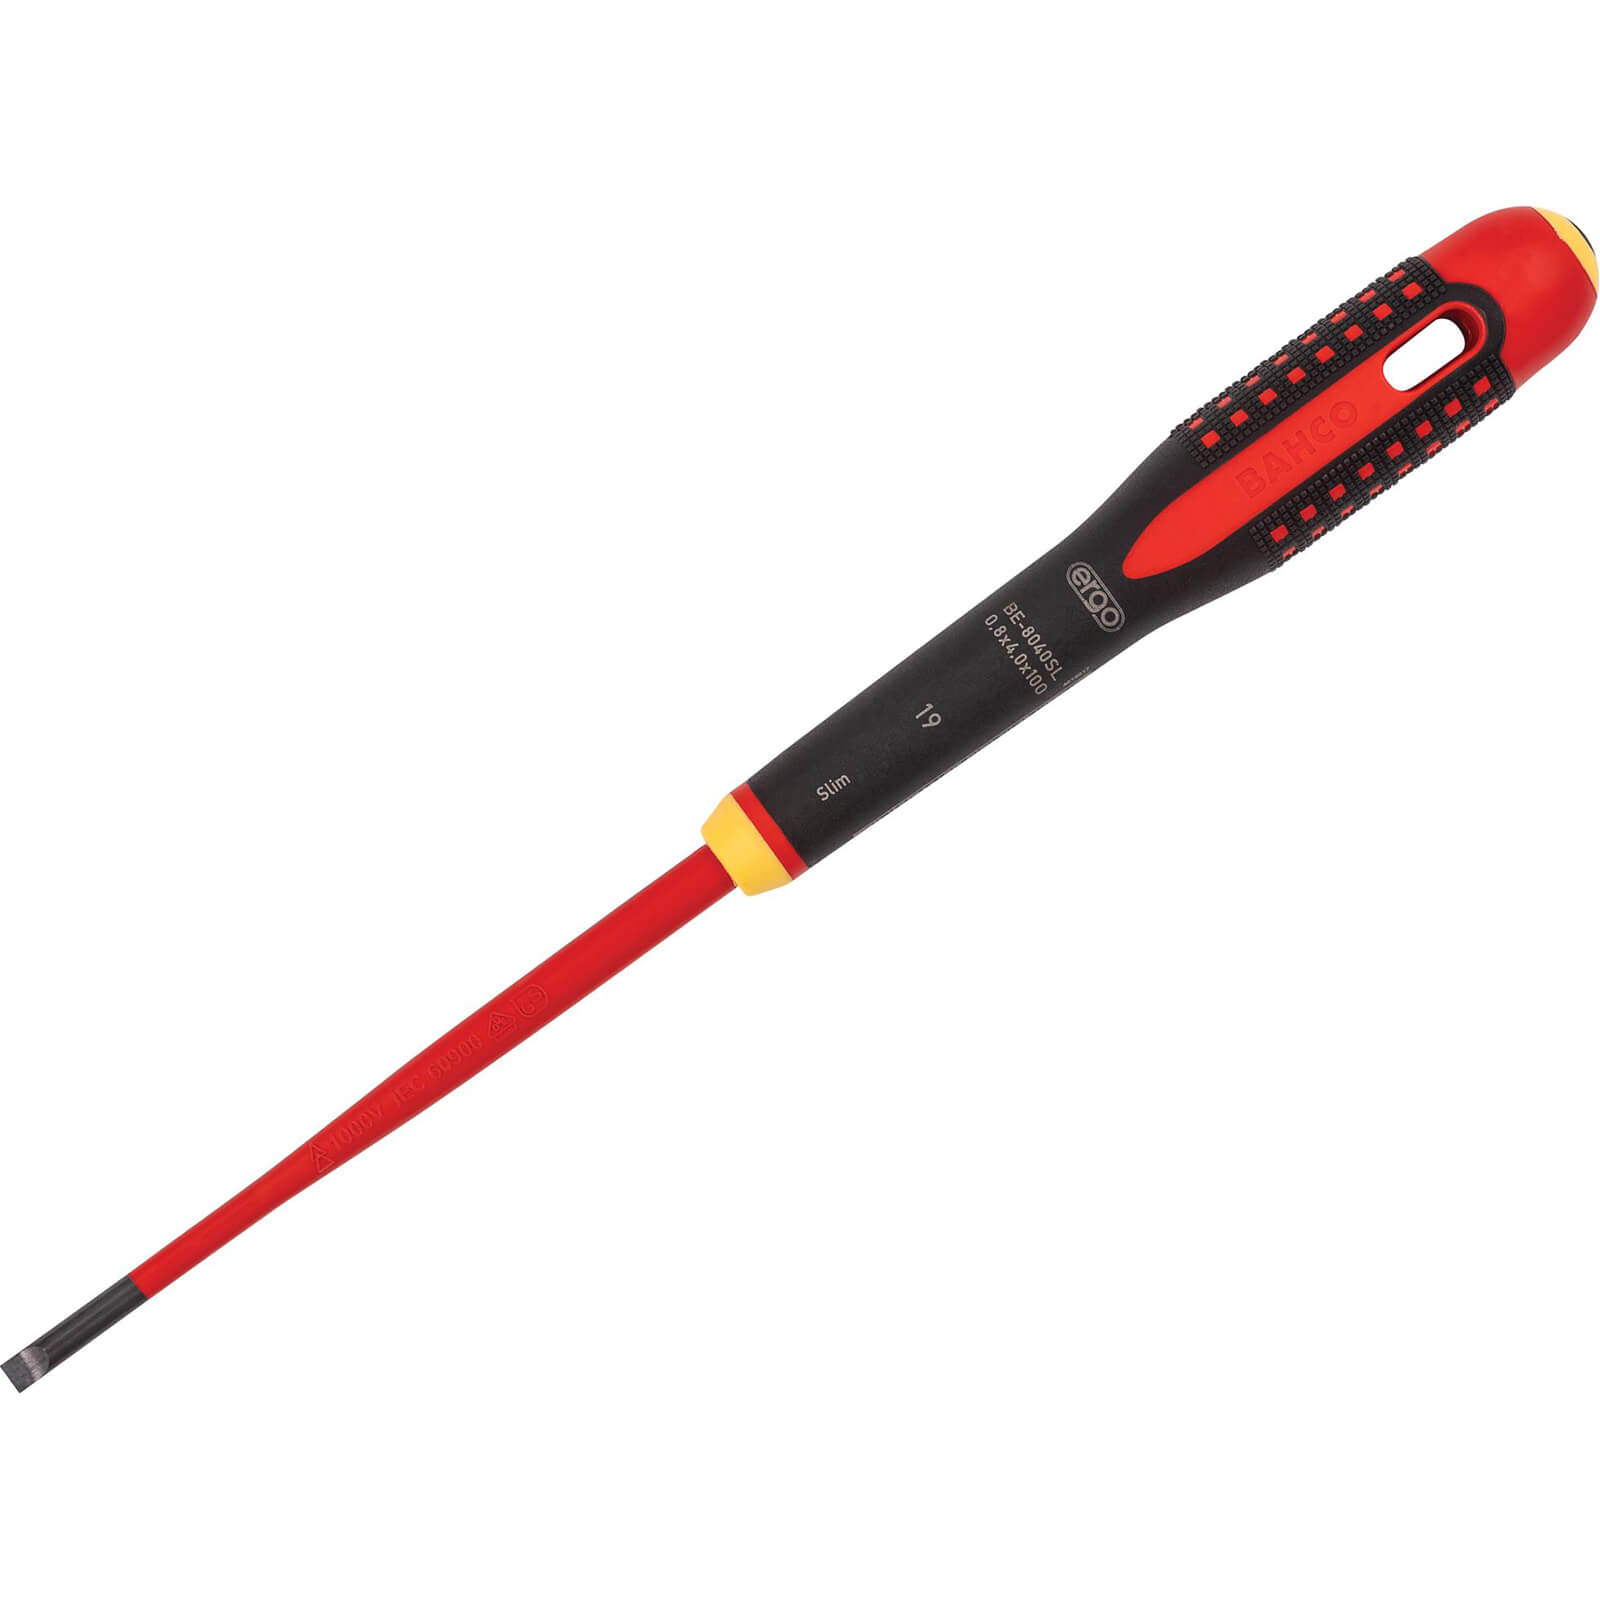 Photo of Bahco Ergo Slim Vde Insulated Slotted Screwdriver 6.5mm 150mm